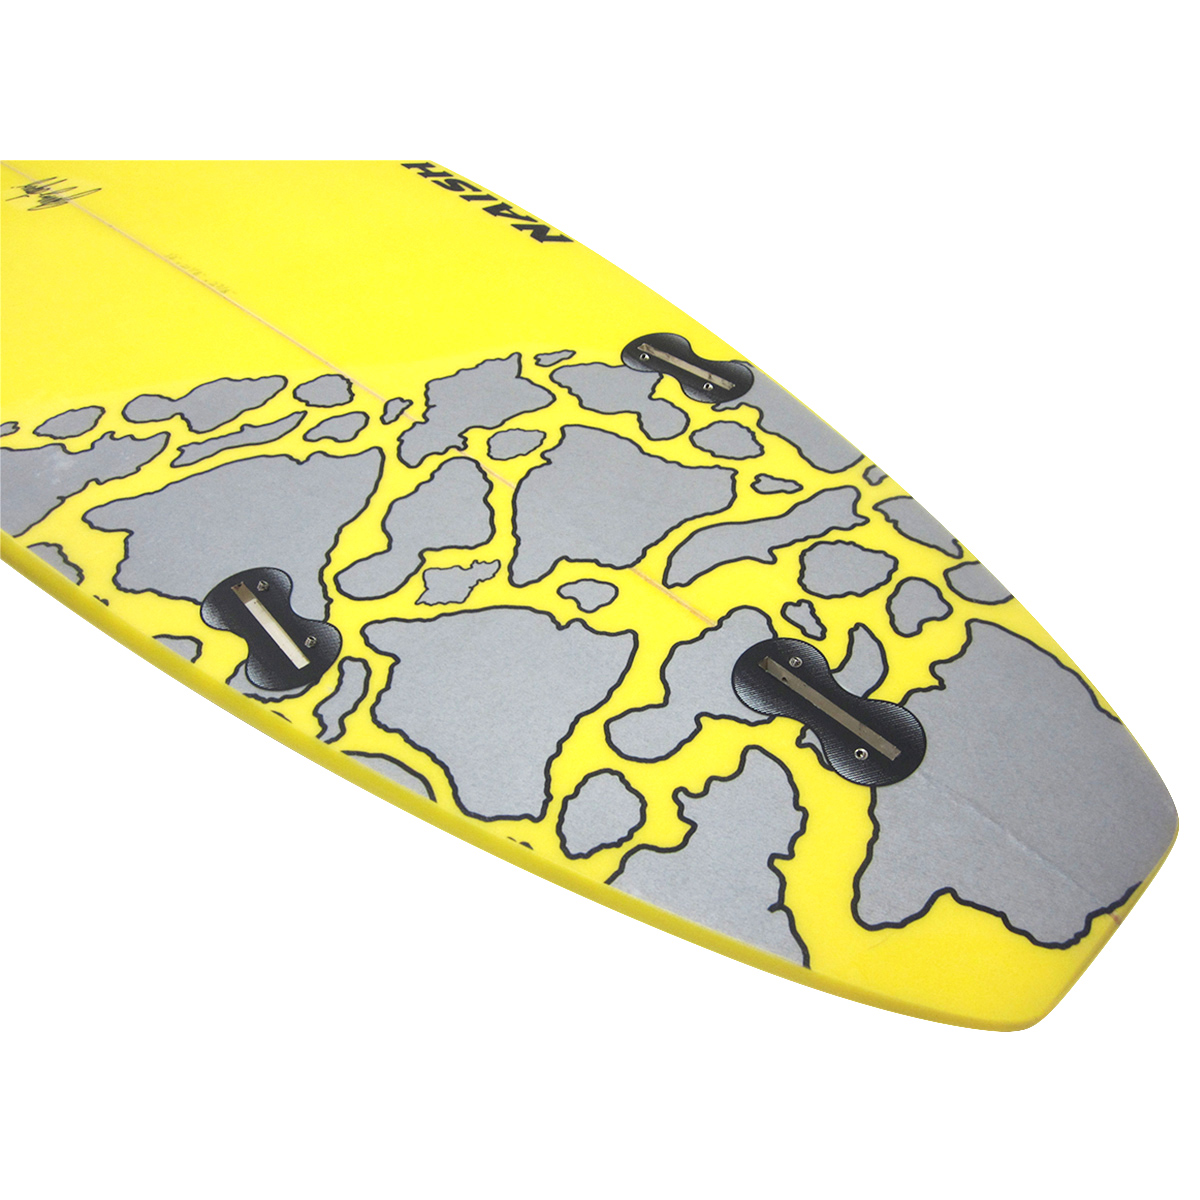 NAISH x Gerry Lopez / FUN 7`4 Designed by Gerry Lopez